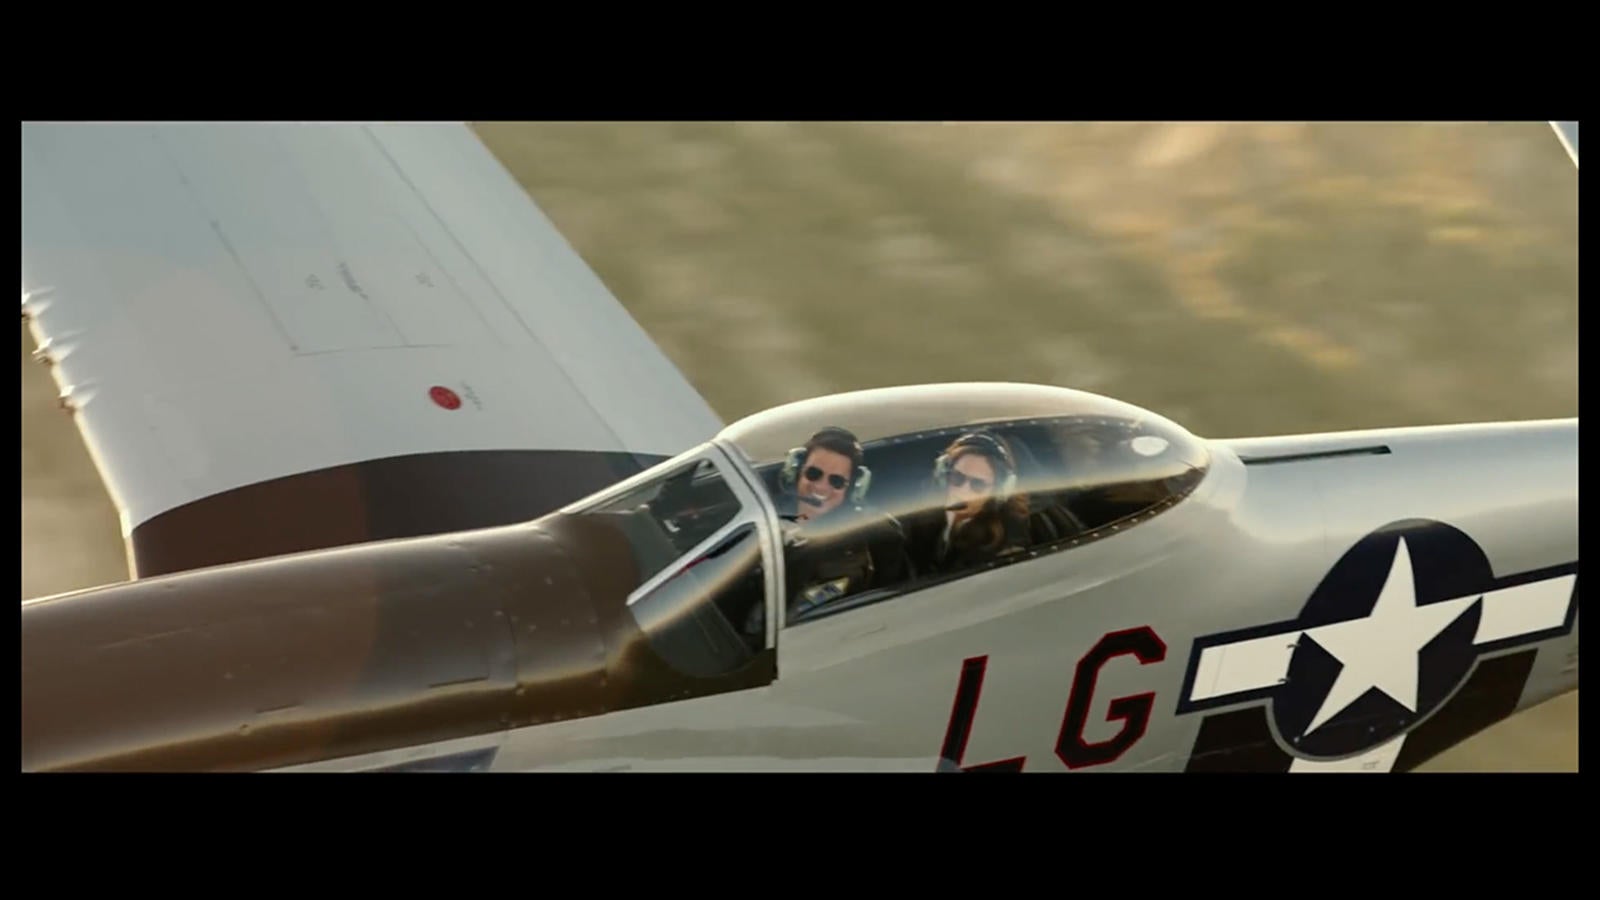 is that tom cruise's p51